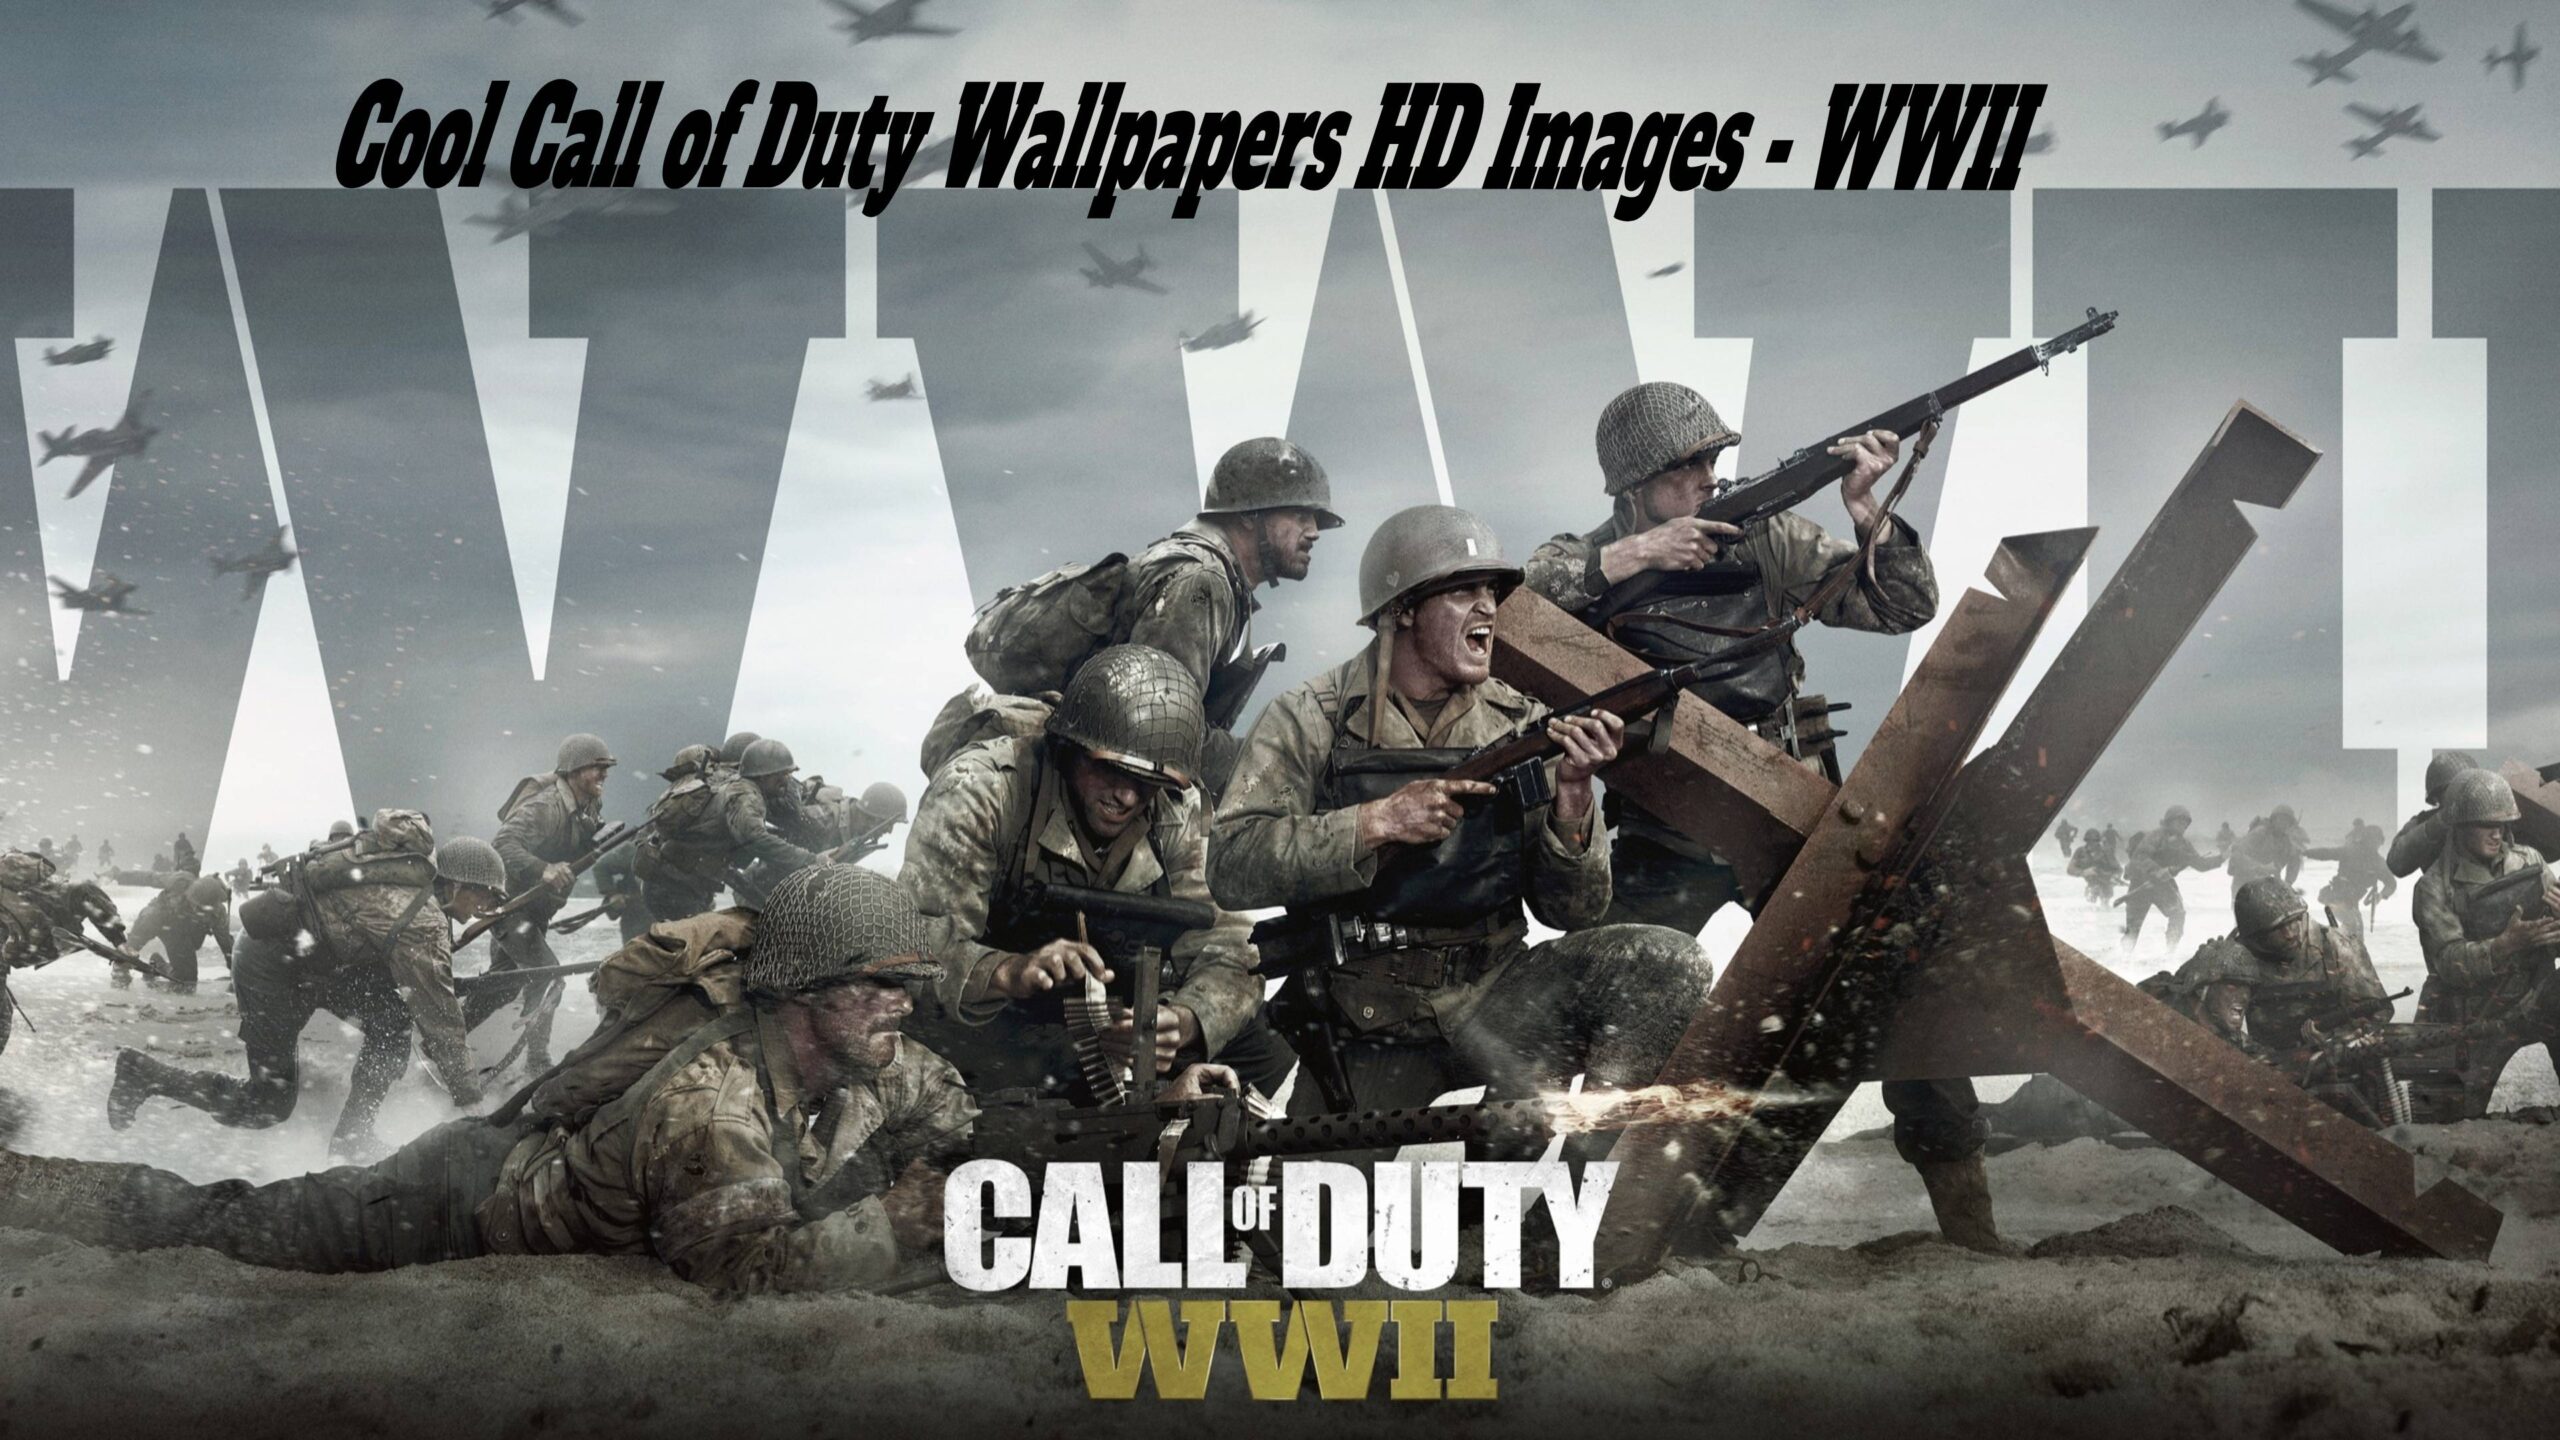 Cool Call of Duty Wallpapers HD Images – WWII